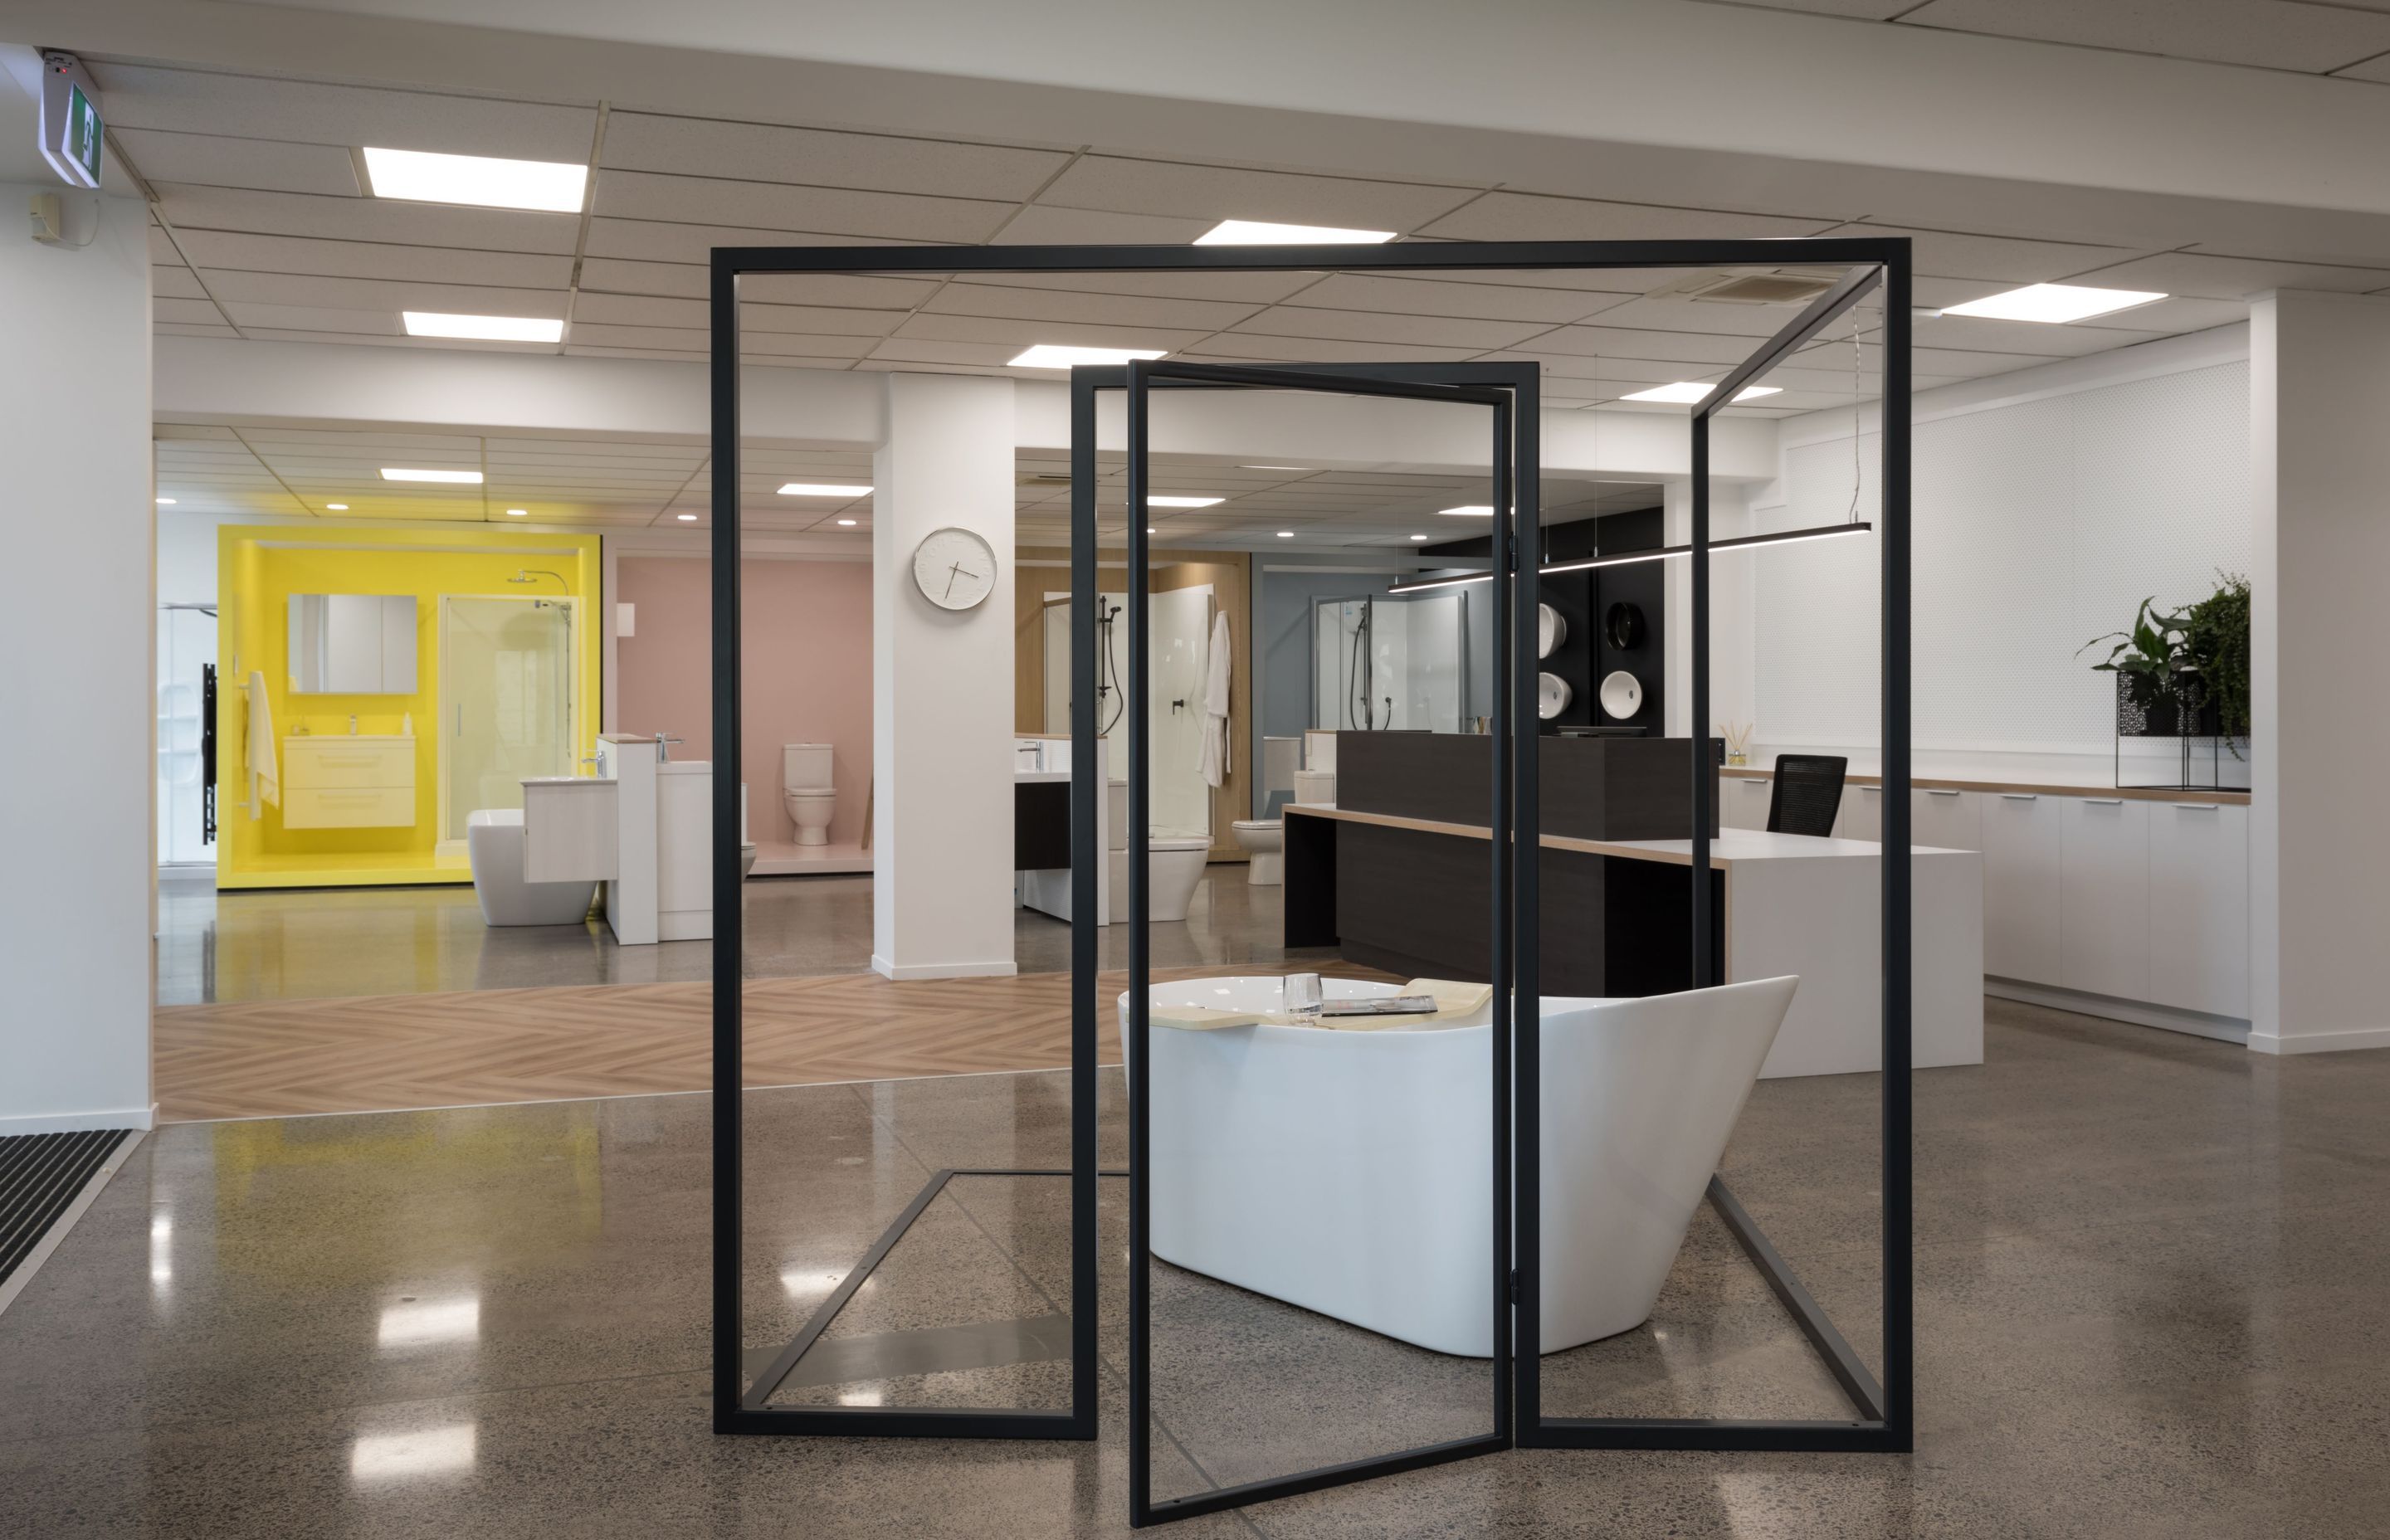 The suggestion of a room within a room, framed in steel is the showroom centre piece.